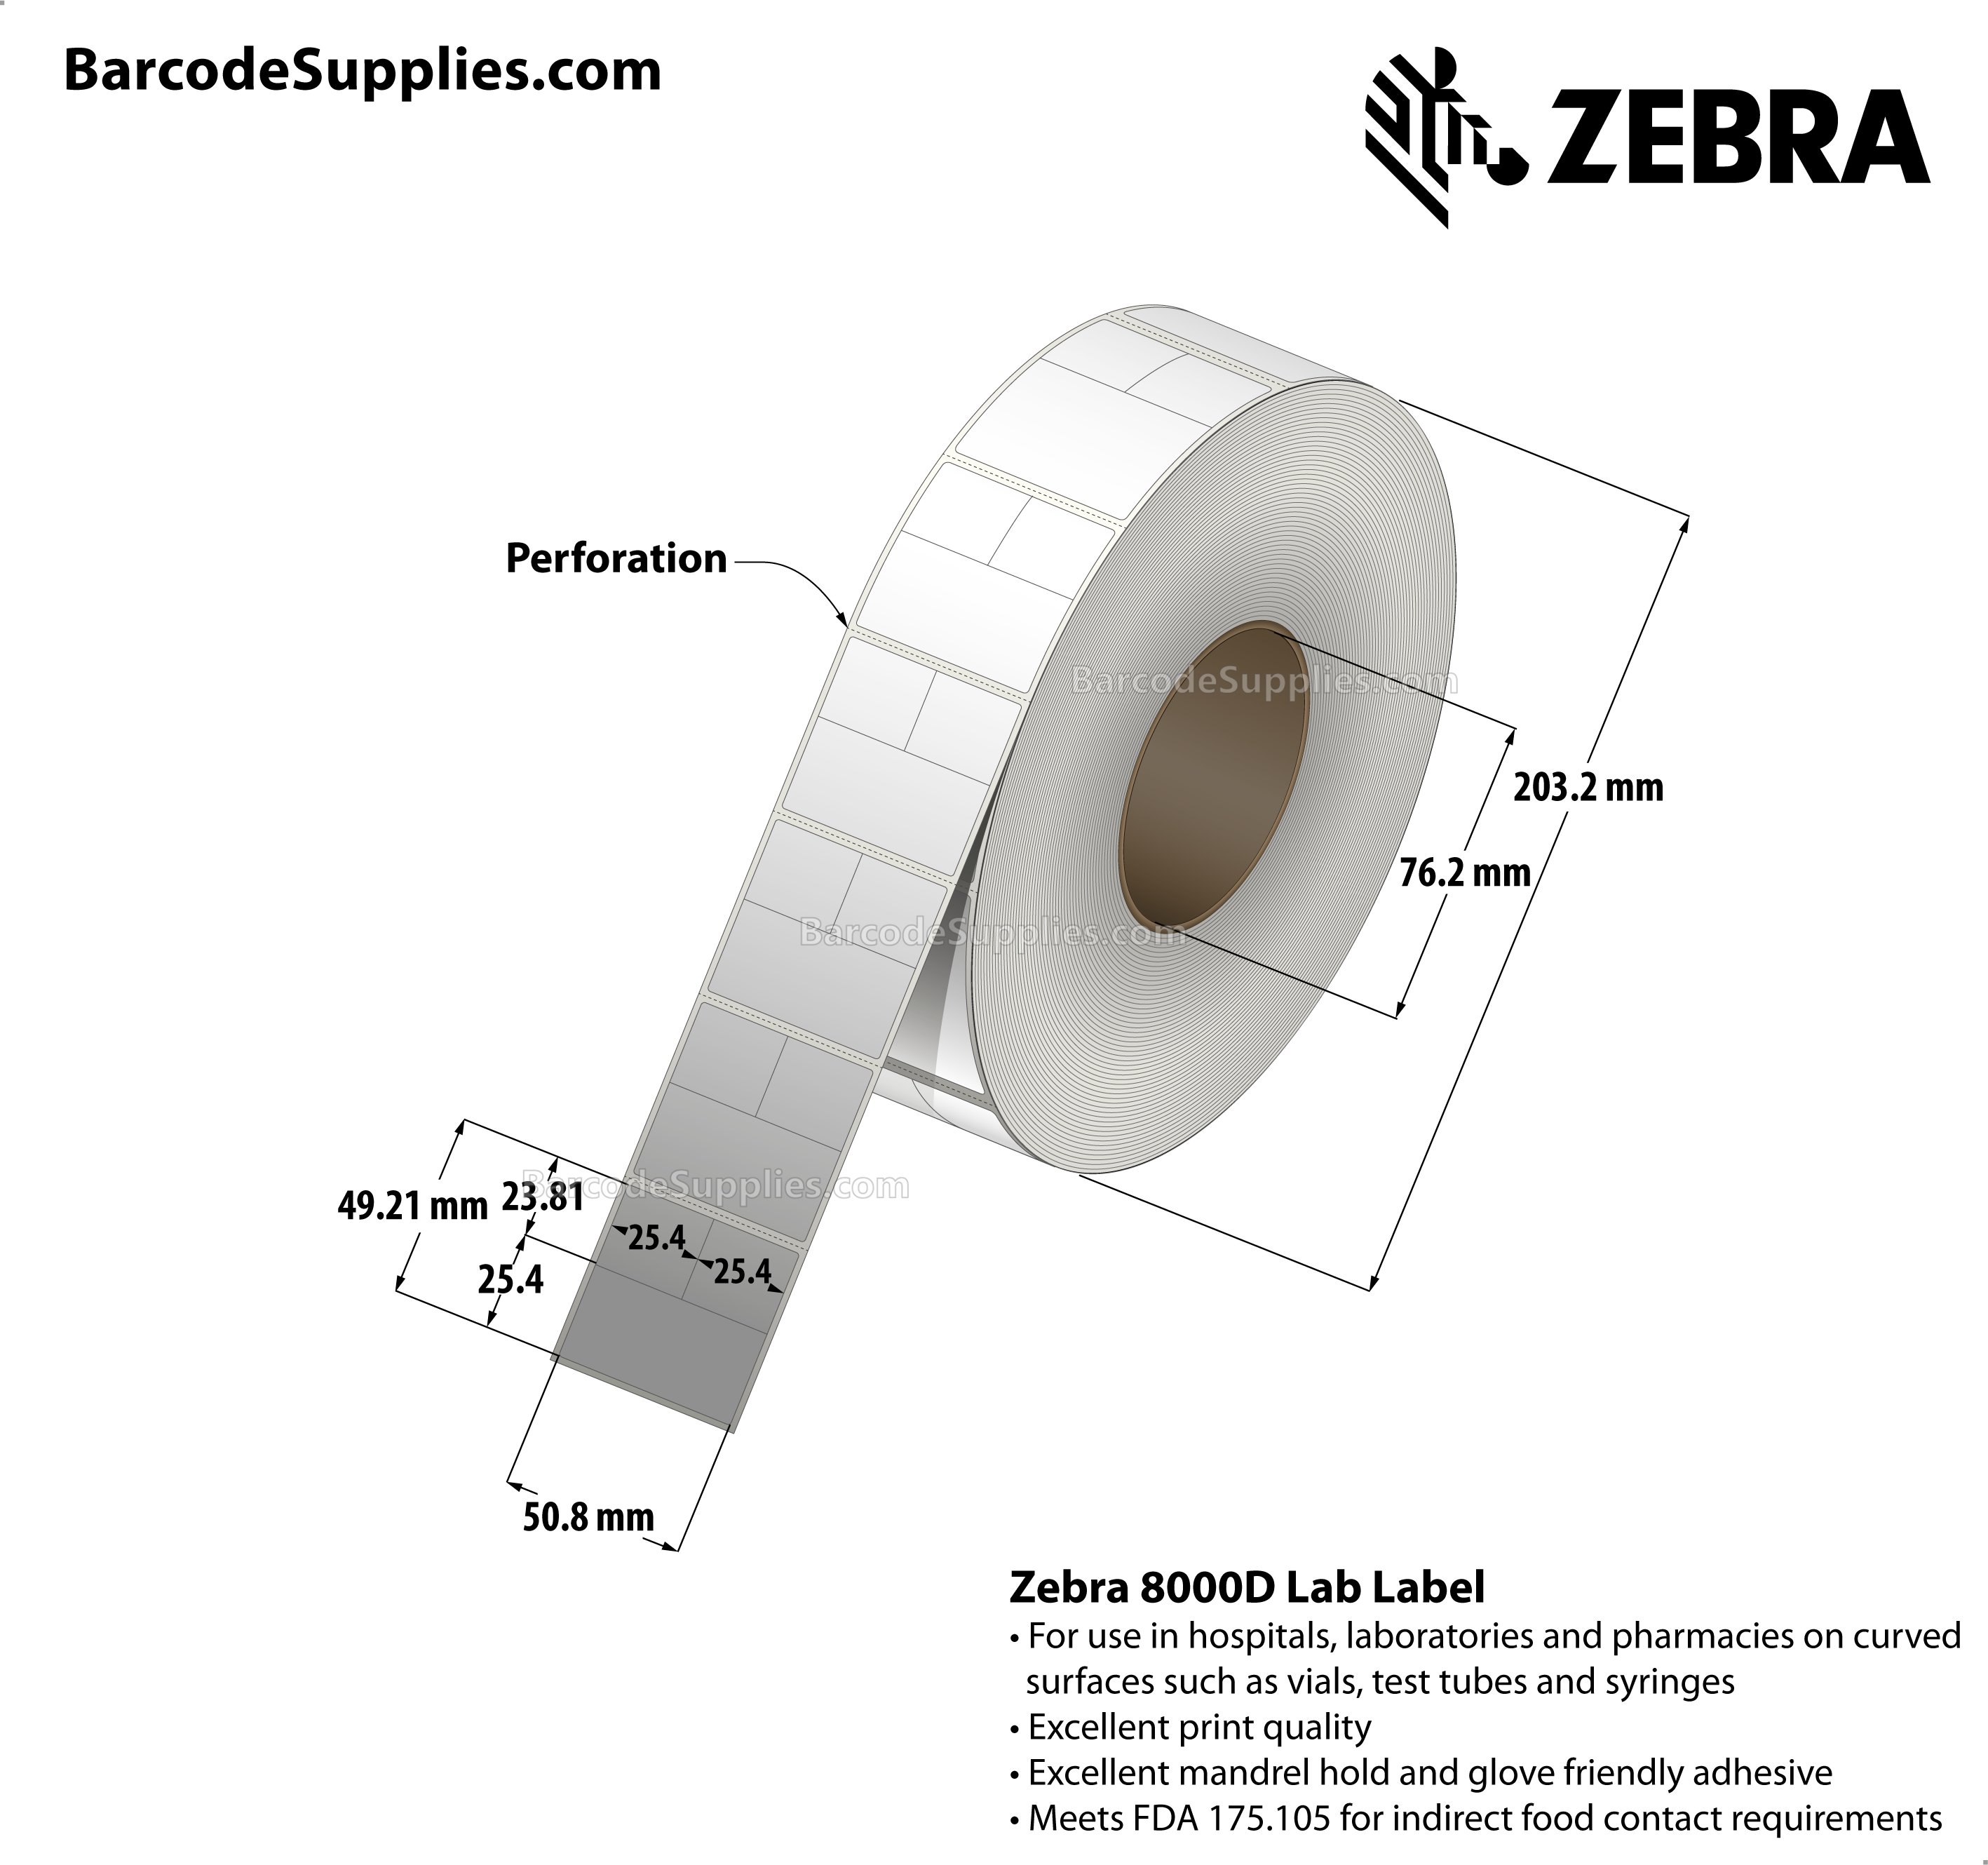 2 x 1.9375 Direct Thermal White 8000D Lab Labels With Permanent Adhesive - Slits through facestock create three labels: (2) 1x0.9375 labels and (2) 2x1 labels - Perforated - 2700 Labels Per Roll - Carton Of 6 Rolls - 16200 Labels Total - MPN: 10025479